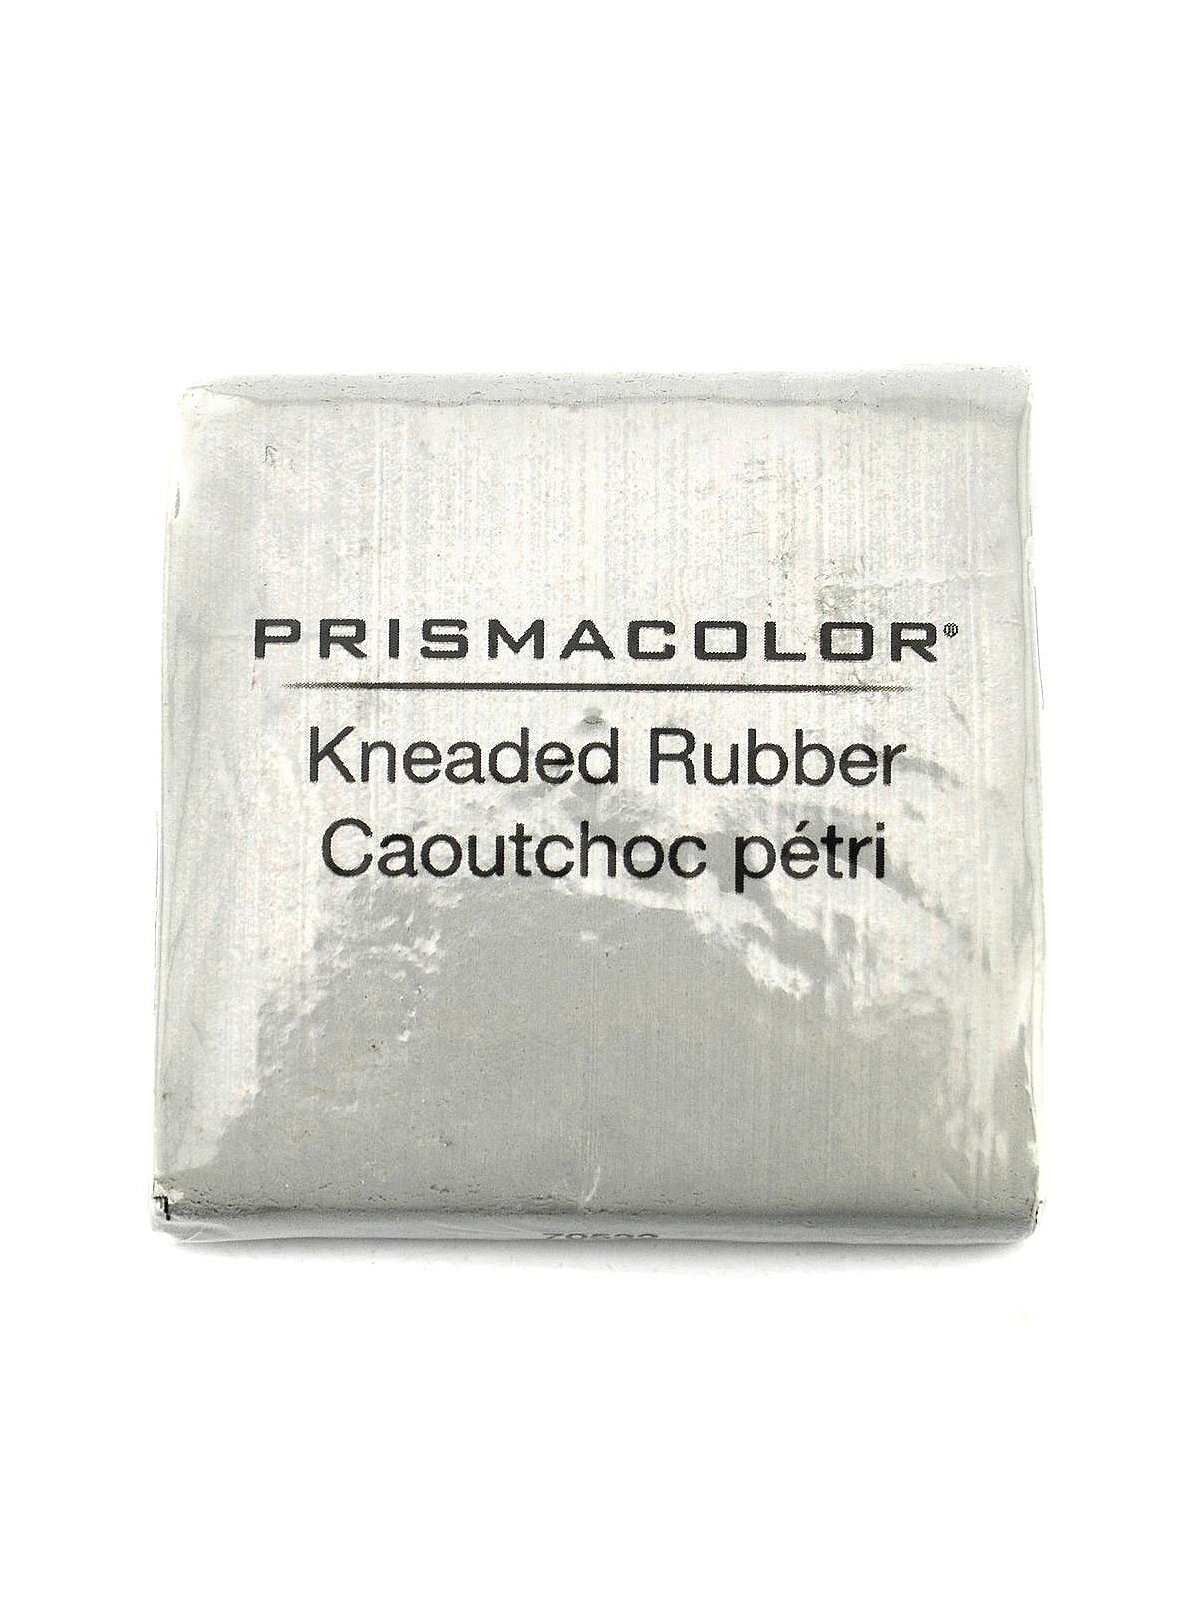 UPlama 24Pcs Kneaded Rubber Erasers for Drawing Cleaning Charcoal